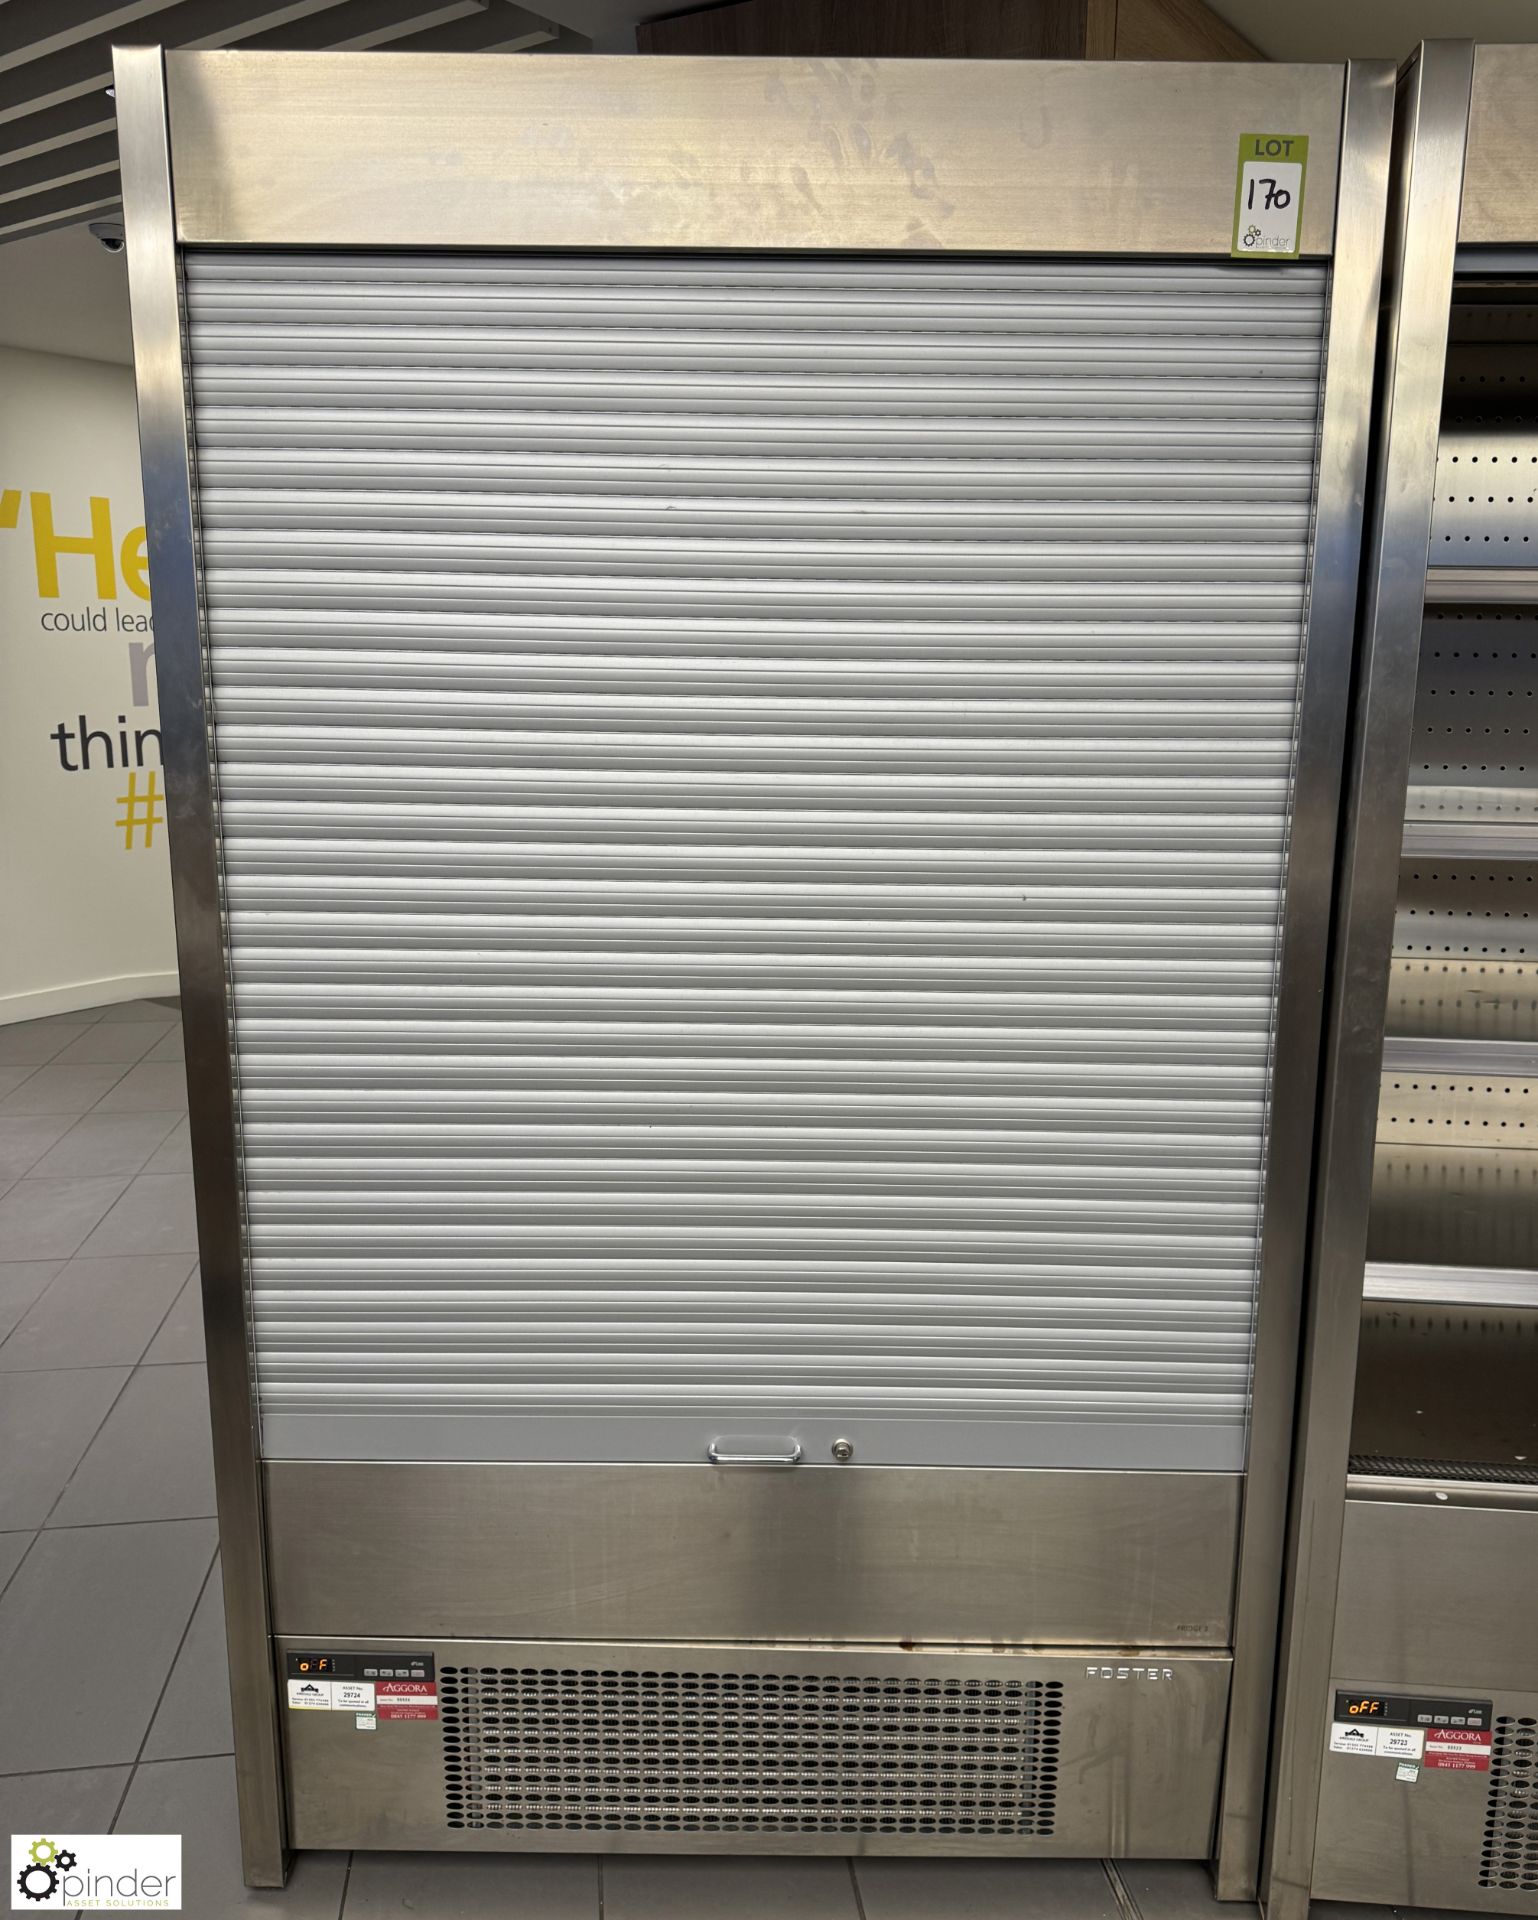 Foster stainless steel shutter front Chilled Food Display Unit, 1200mm x 780mm x 2000mm (location in - Image 3 of 4